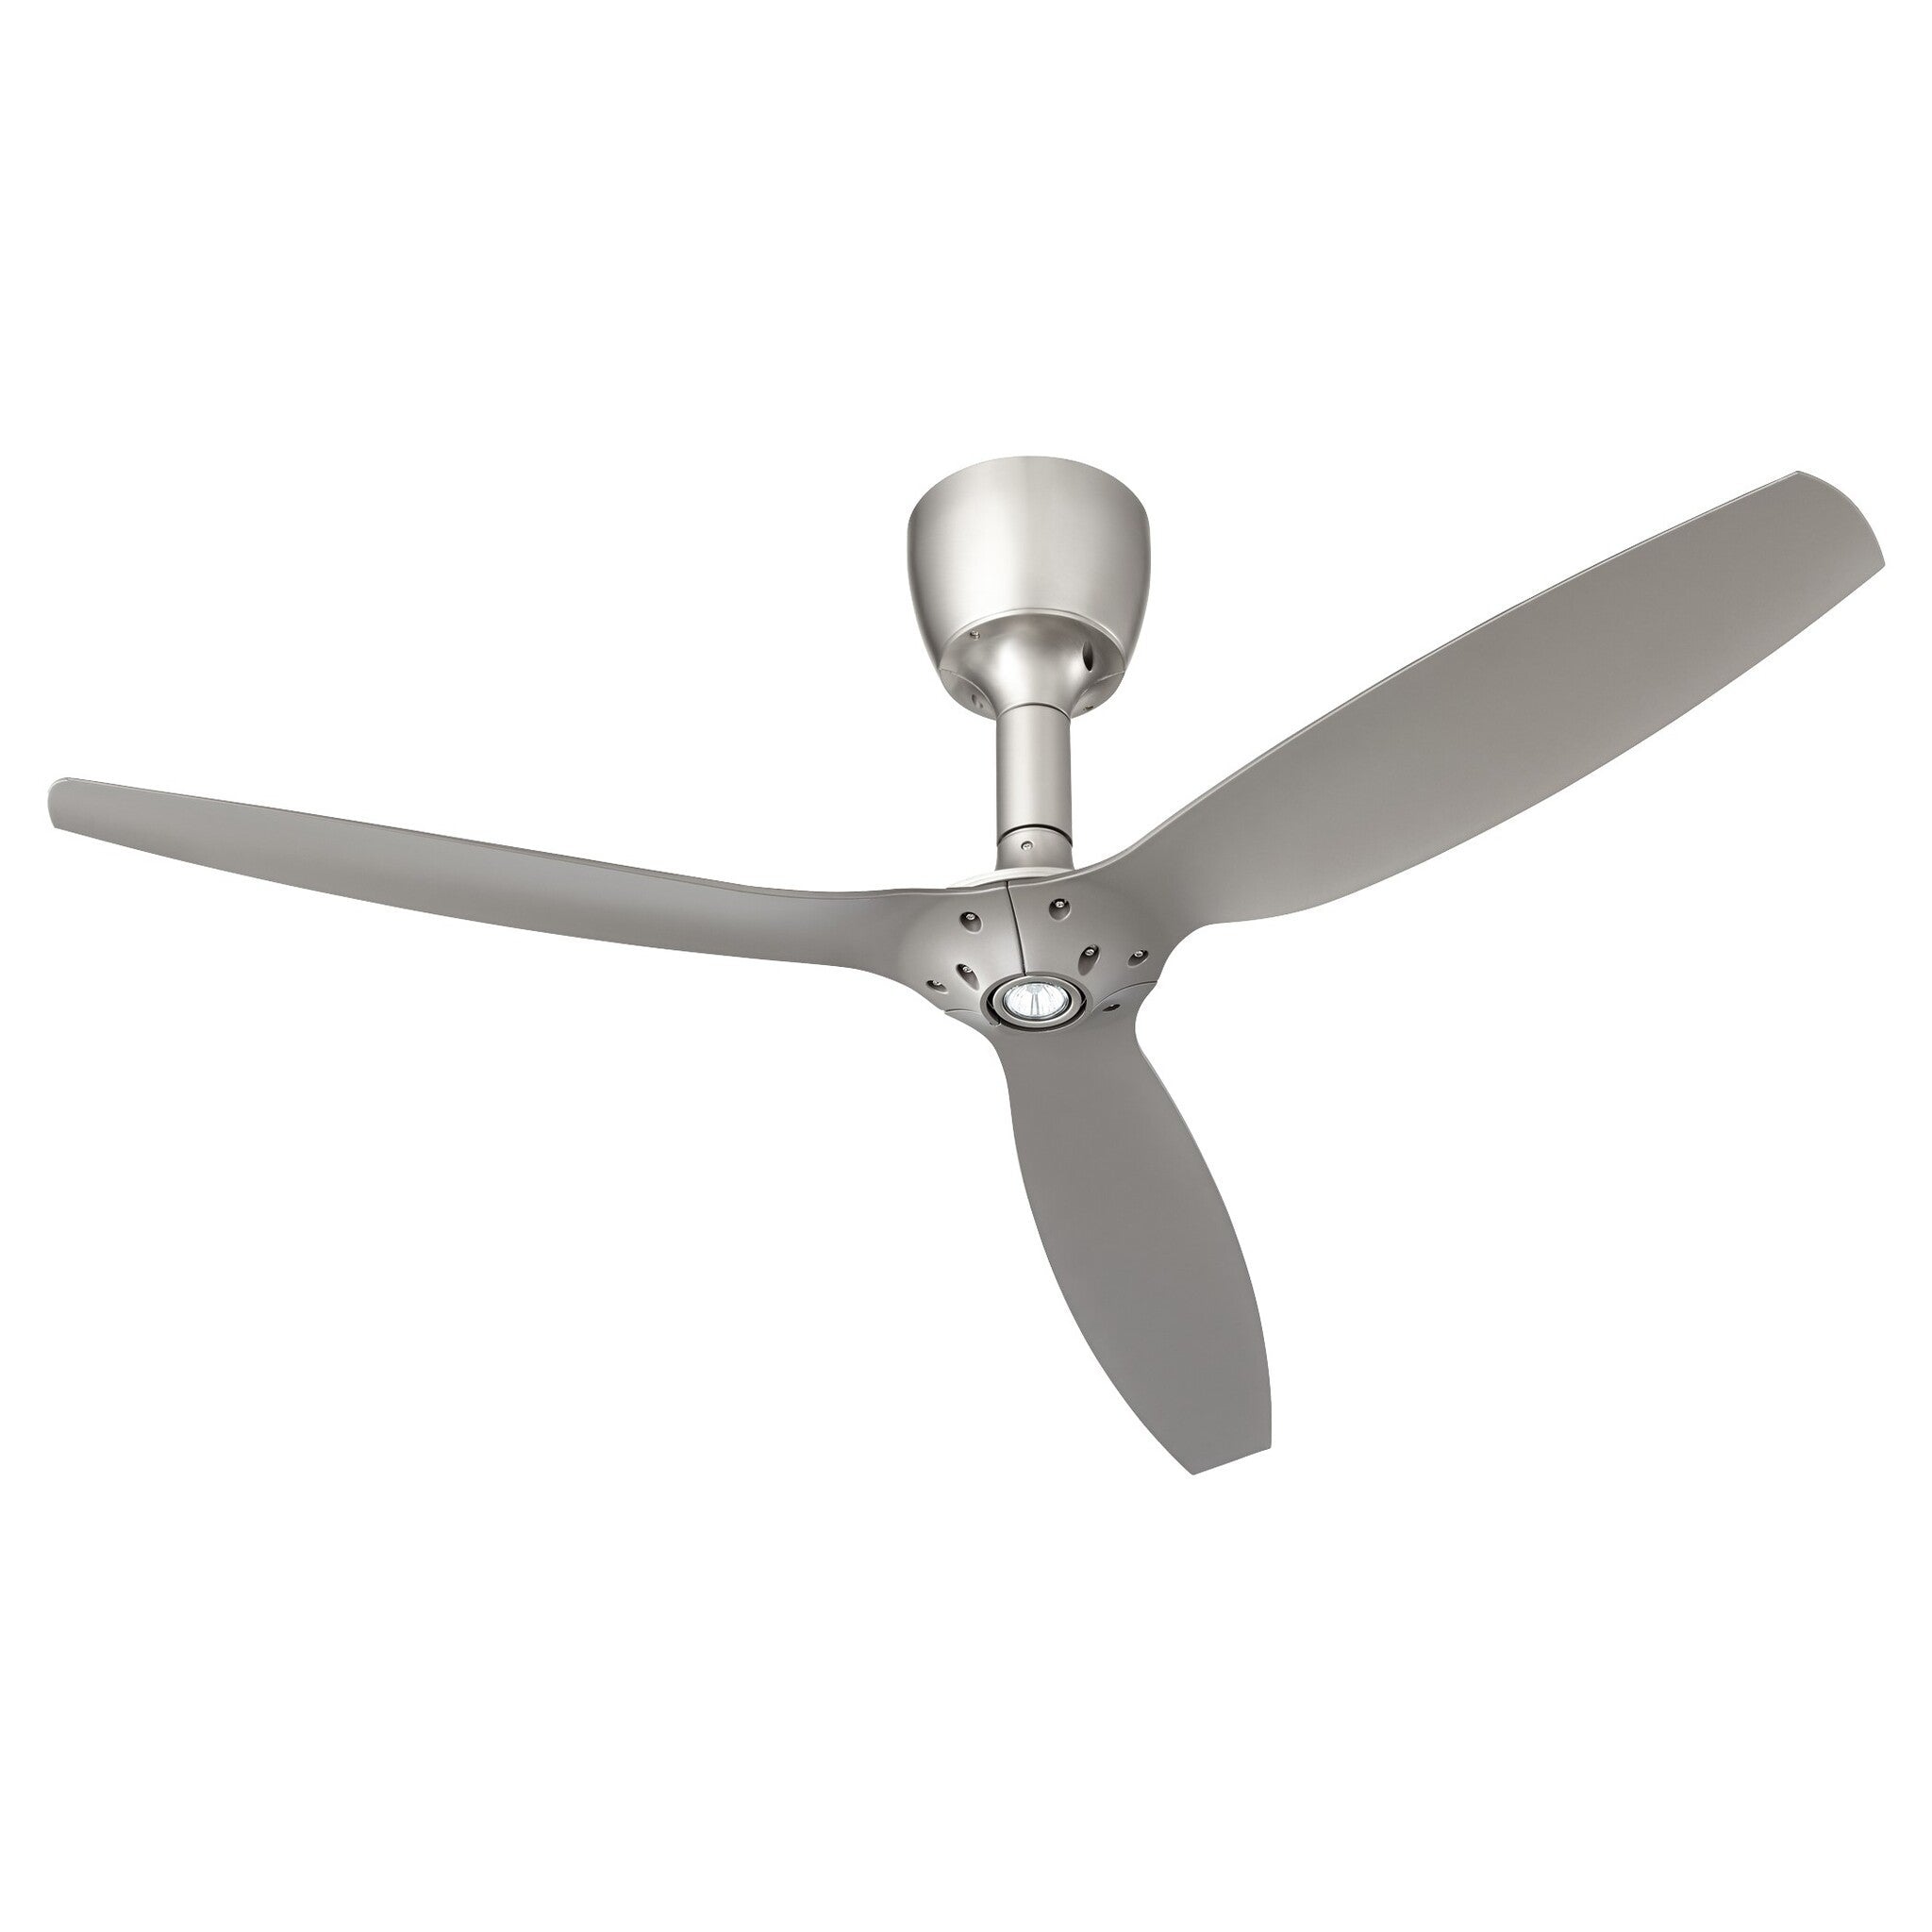 Oxygen ALPHA 3-105-024 60 Inch Ceiling Fan Motor with LED Light - Satin Nickel (Order Blades Separately)